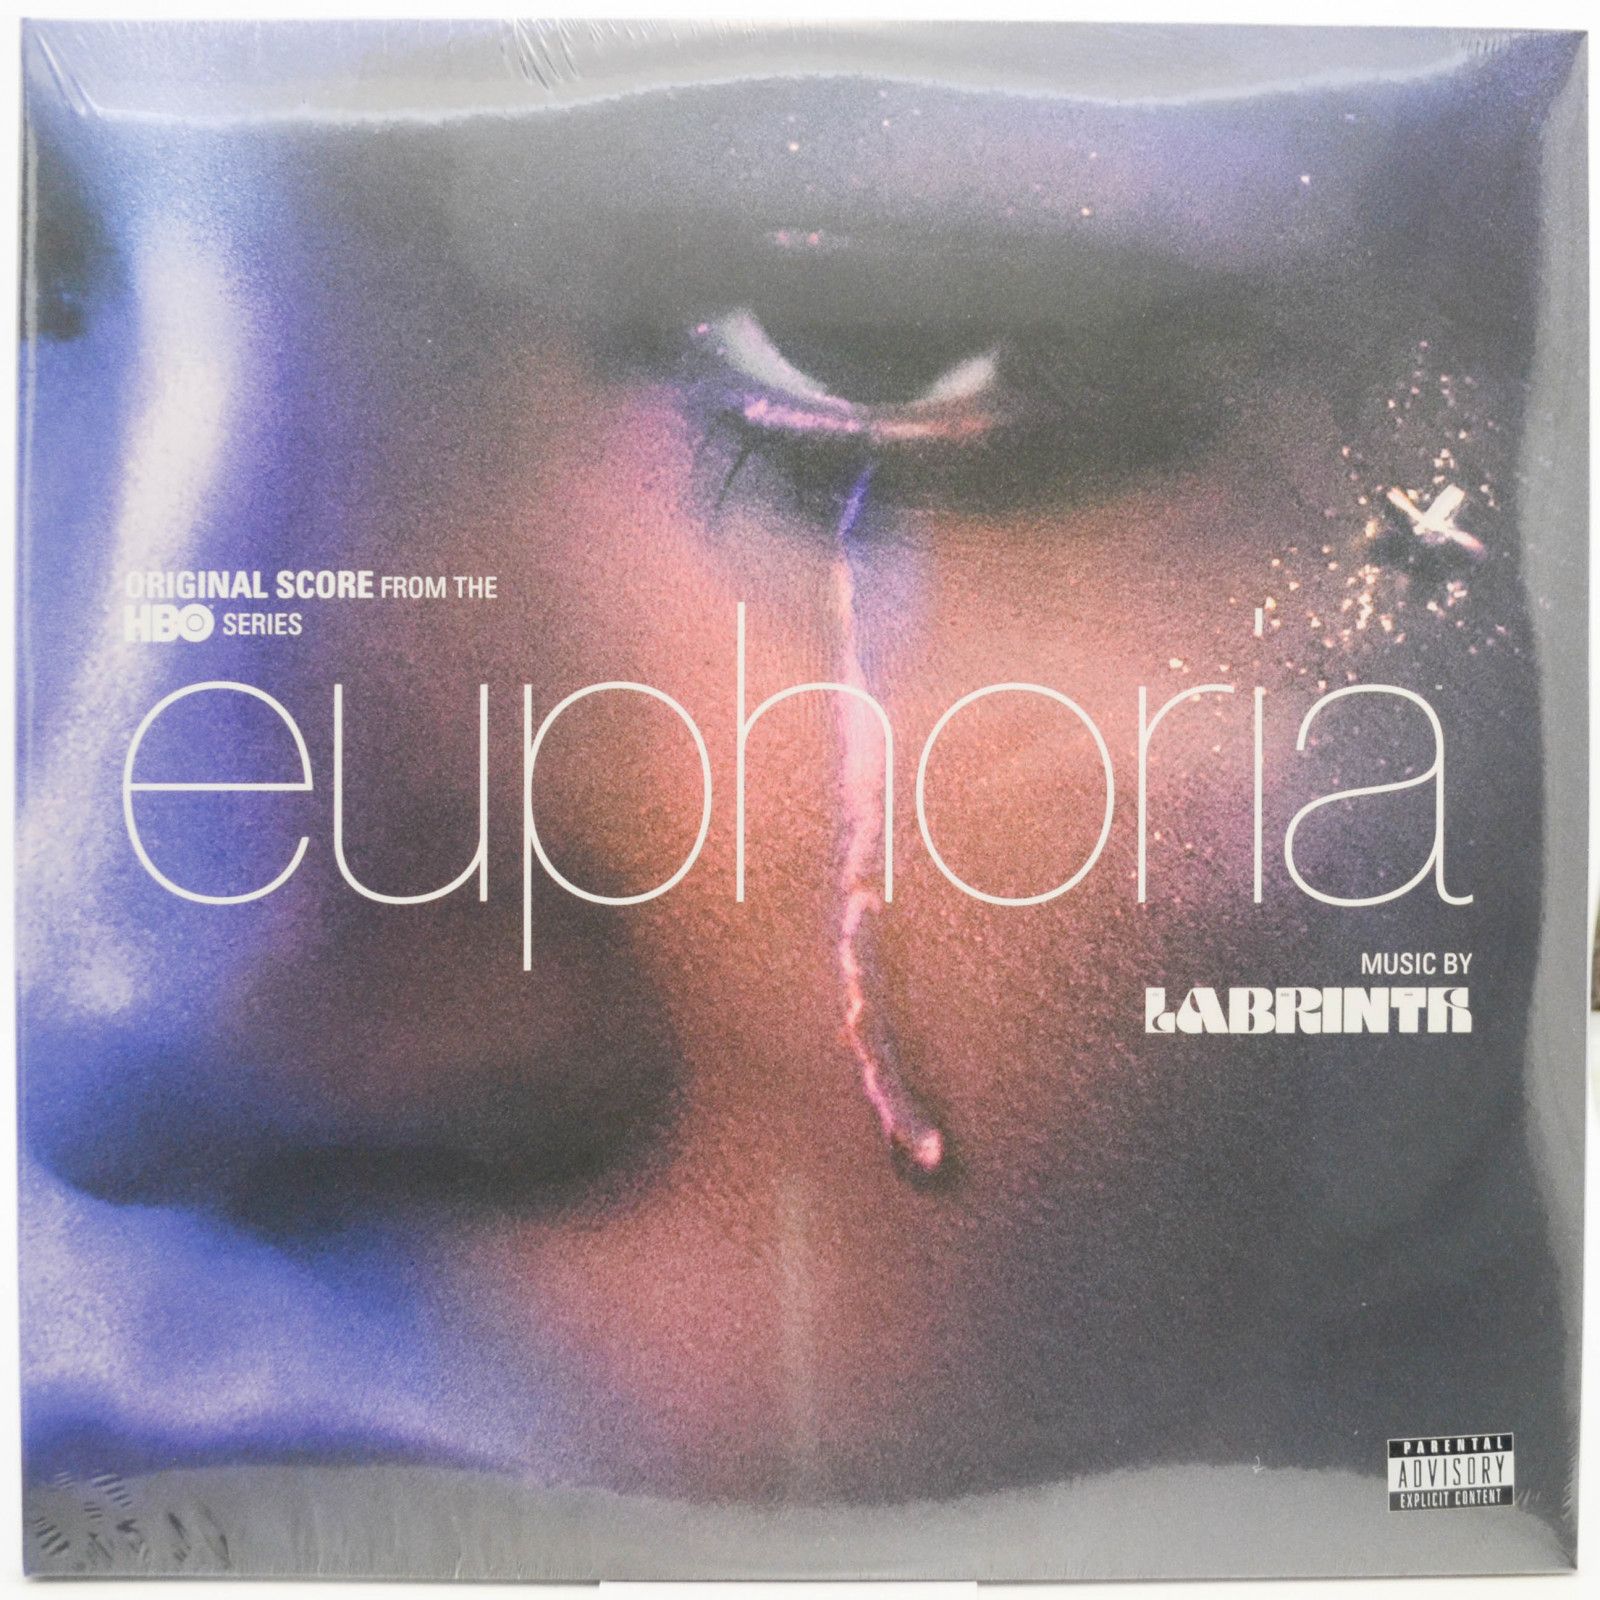 Labrinth — Euphoria (Original Score From The HBO Series) (2LP), 2020